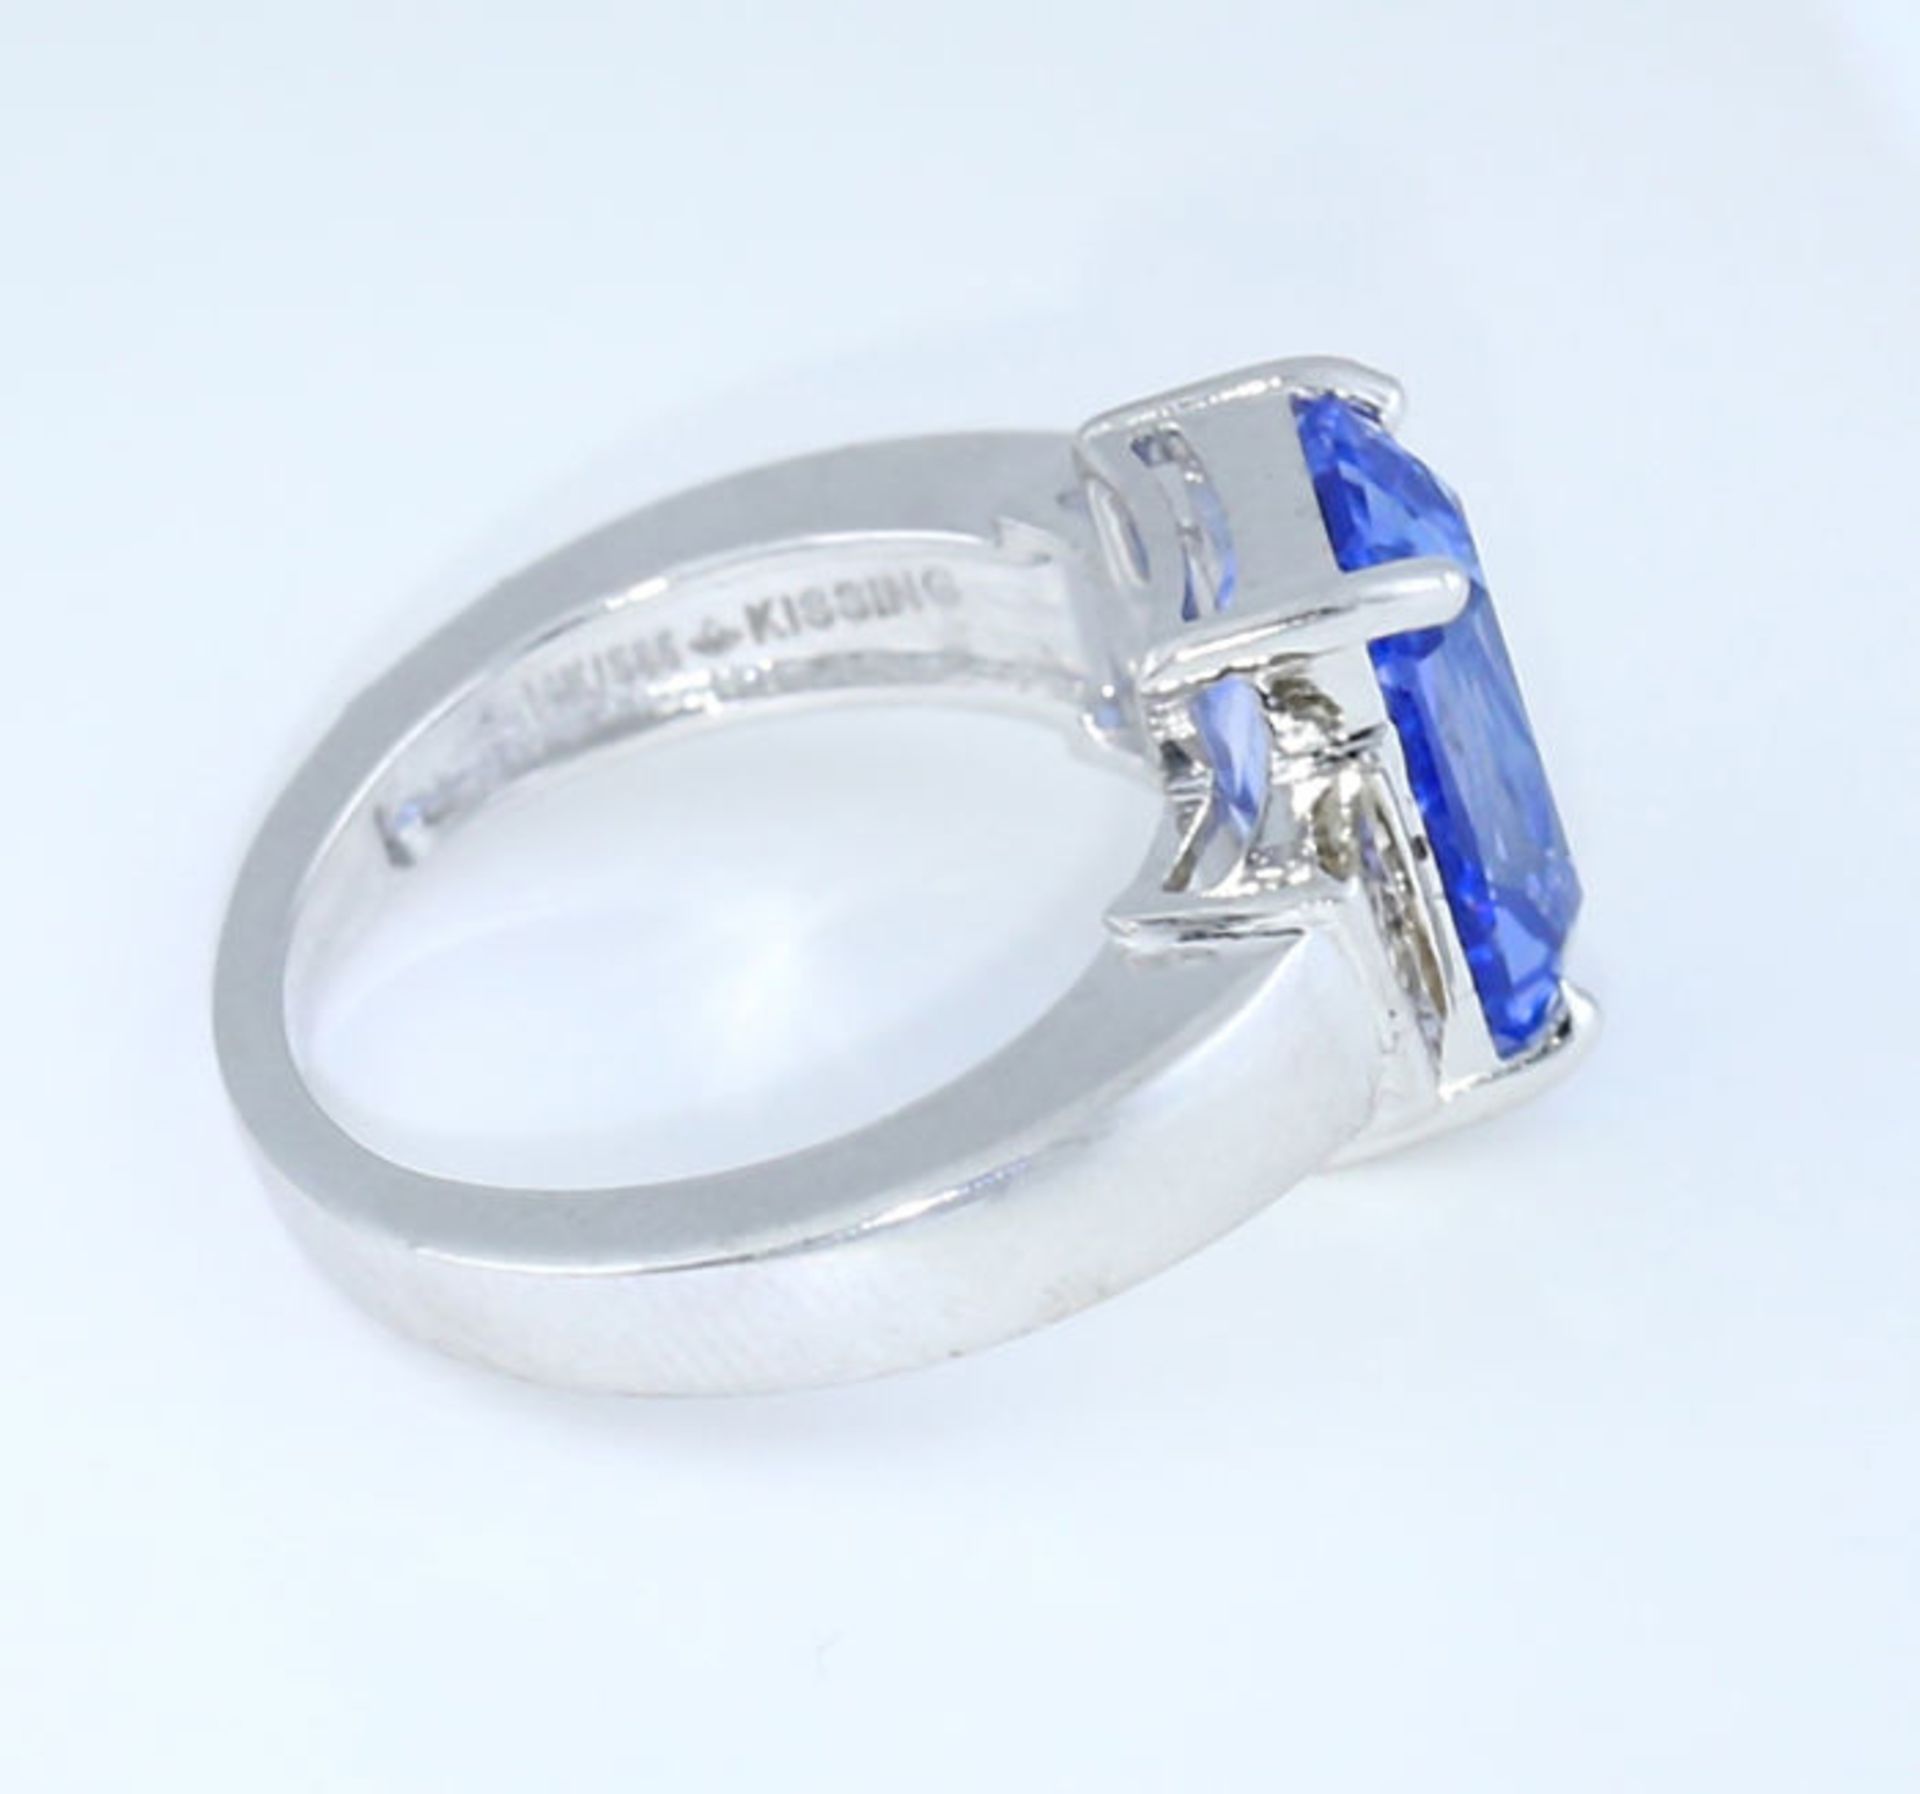 14 K Very Exclusive Designer White Gold Blue Sapphire (GIA Certified) and Diamond Ring - Image 9 of 10